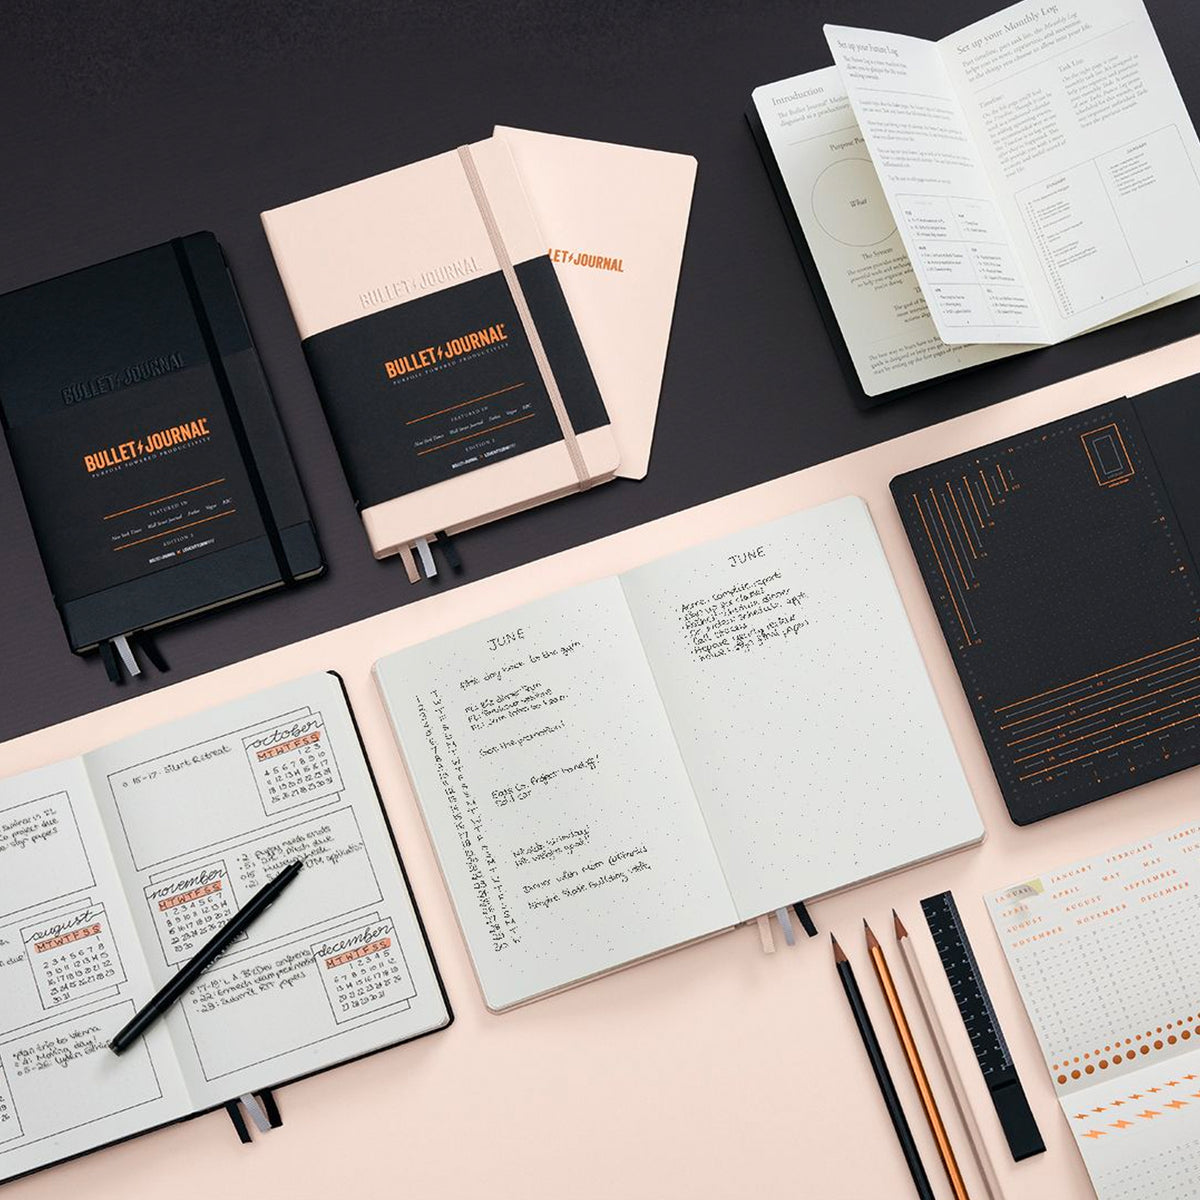 An array of black and pink notebooks and planning tools